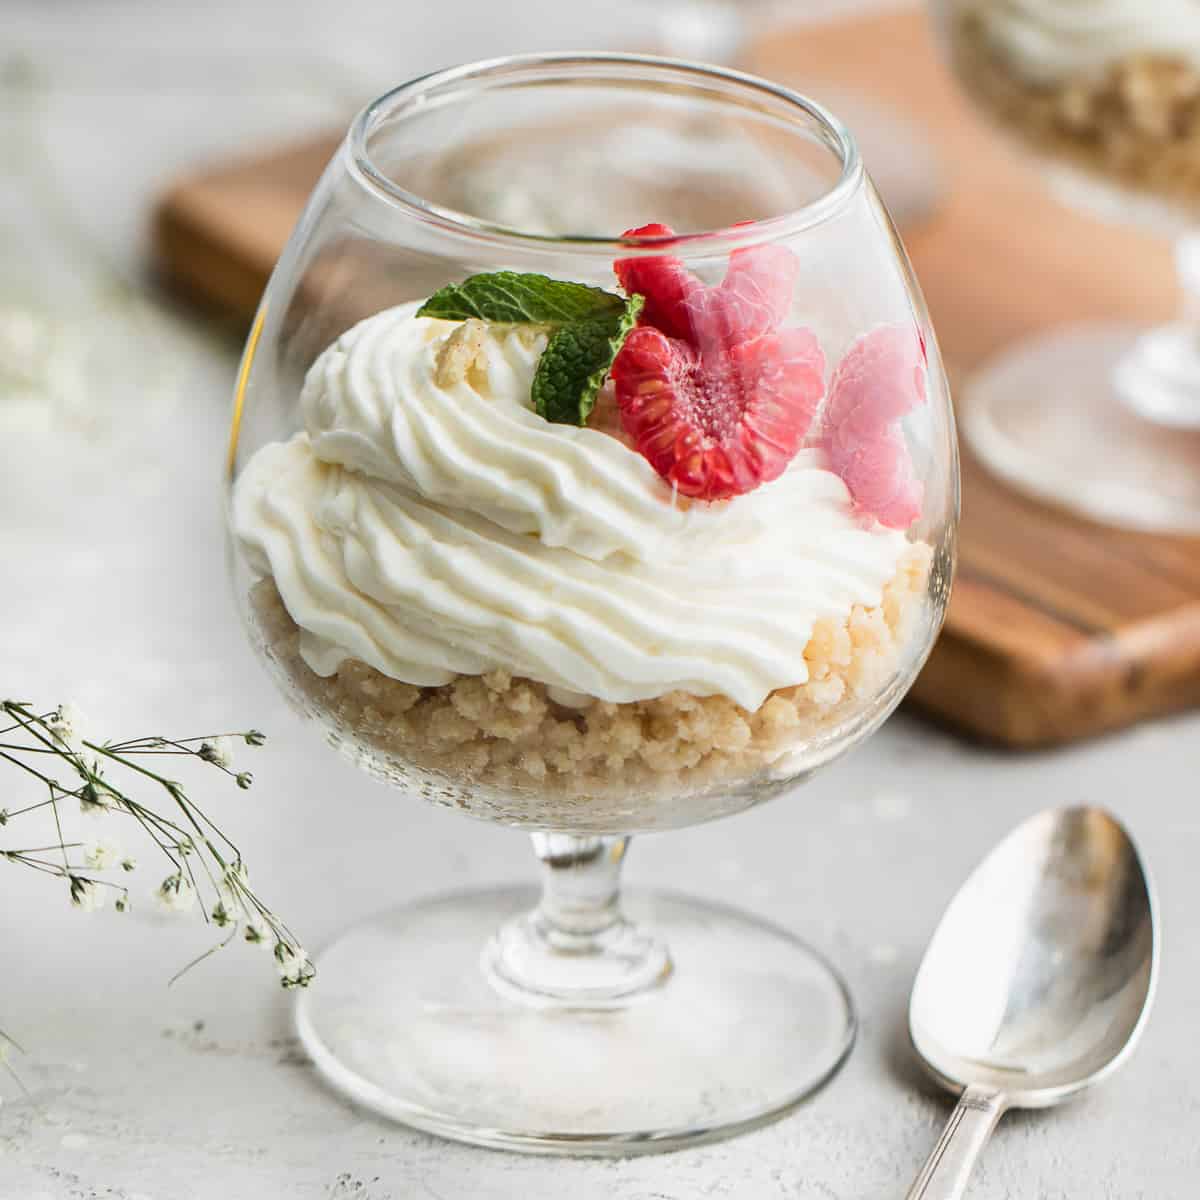 cheesecake in a cup with raspberry and mint garnish